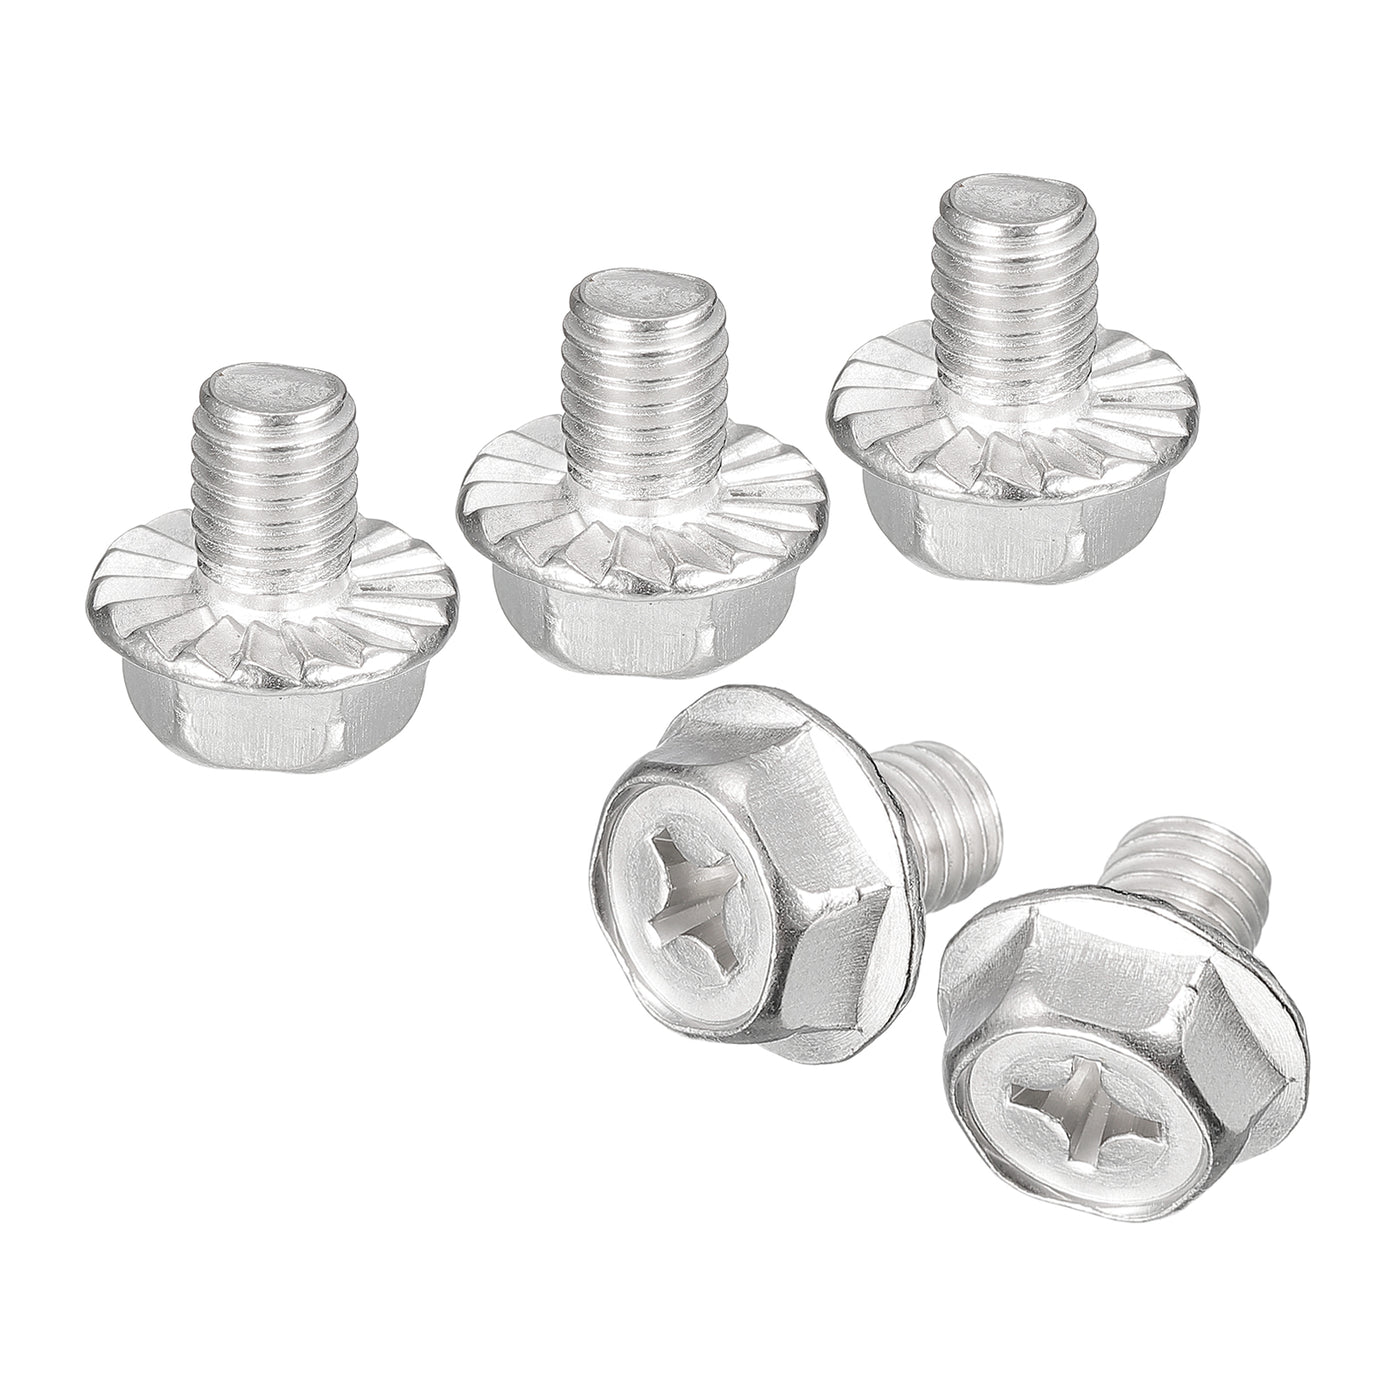 uxcell Uxcell Phillips Hex Head Flange Bolts, 304 Stainless Steel Hexagon Phillips Flange Head Bolts Machine Screws